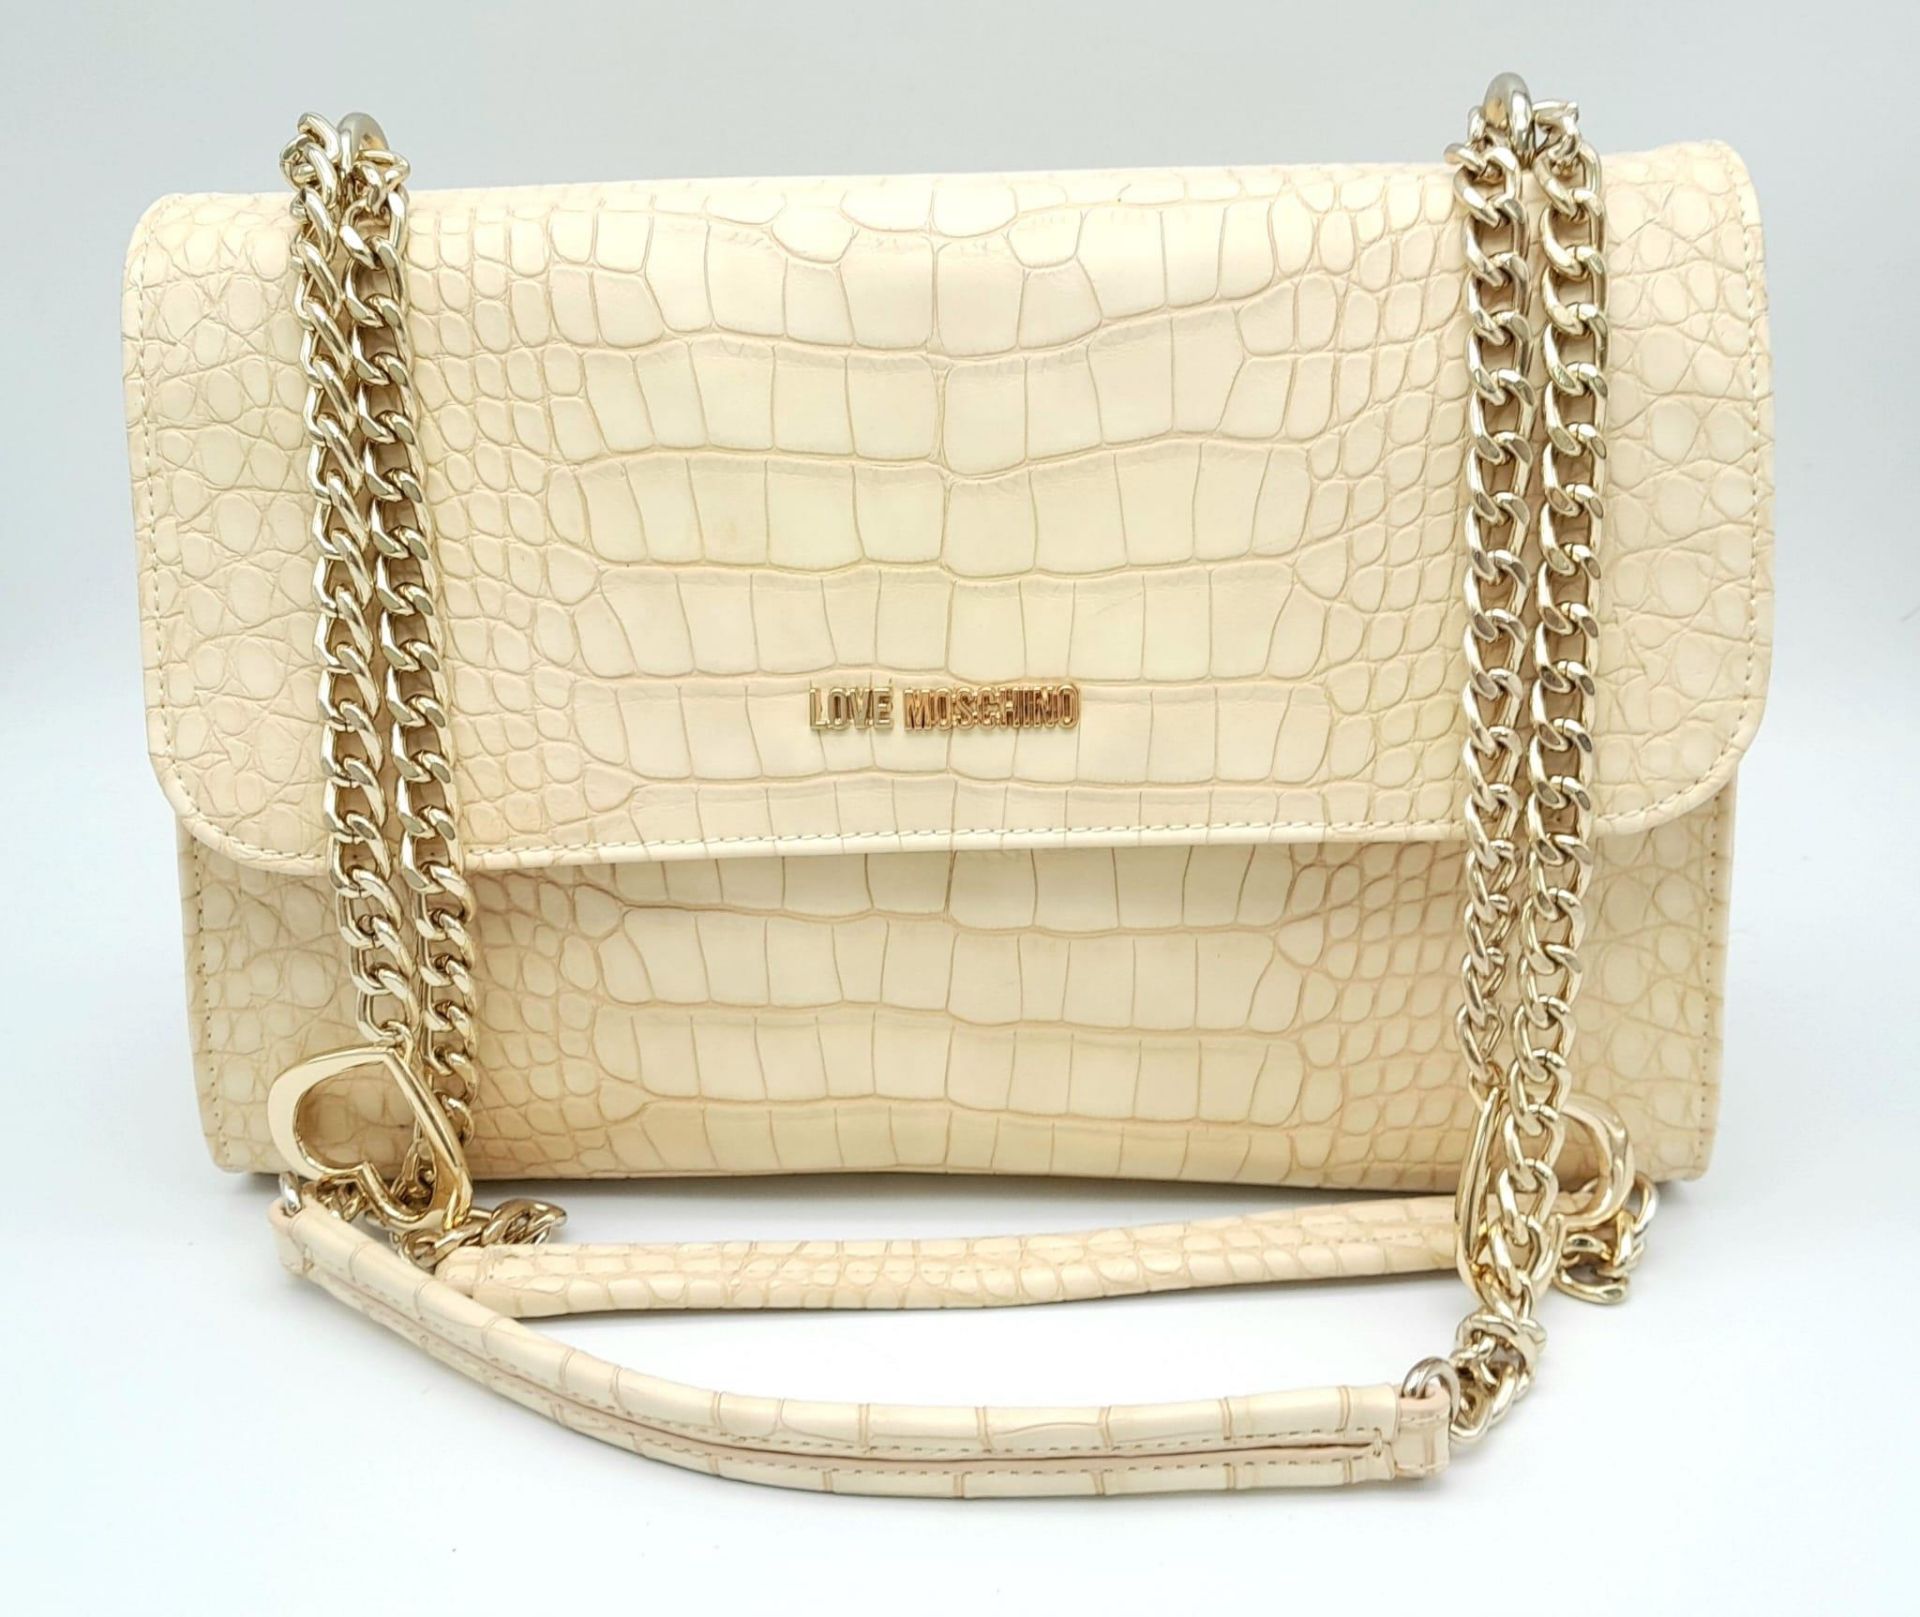 A Light Beige Croco Print Faux MOSCHINO Leather Bag. Come with 2 leather and golden-tone chain